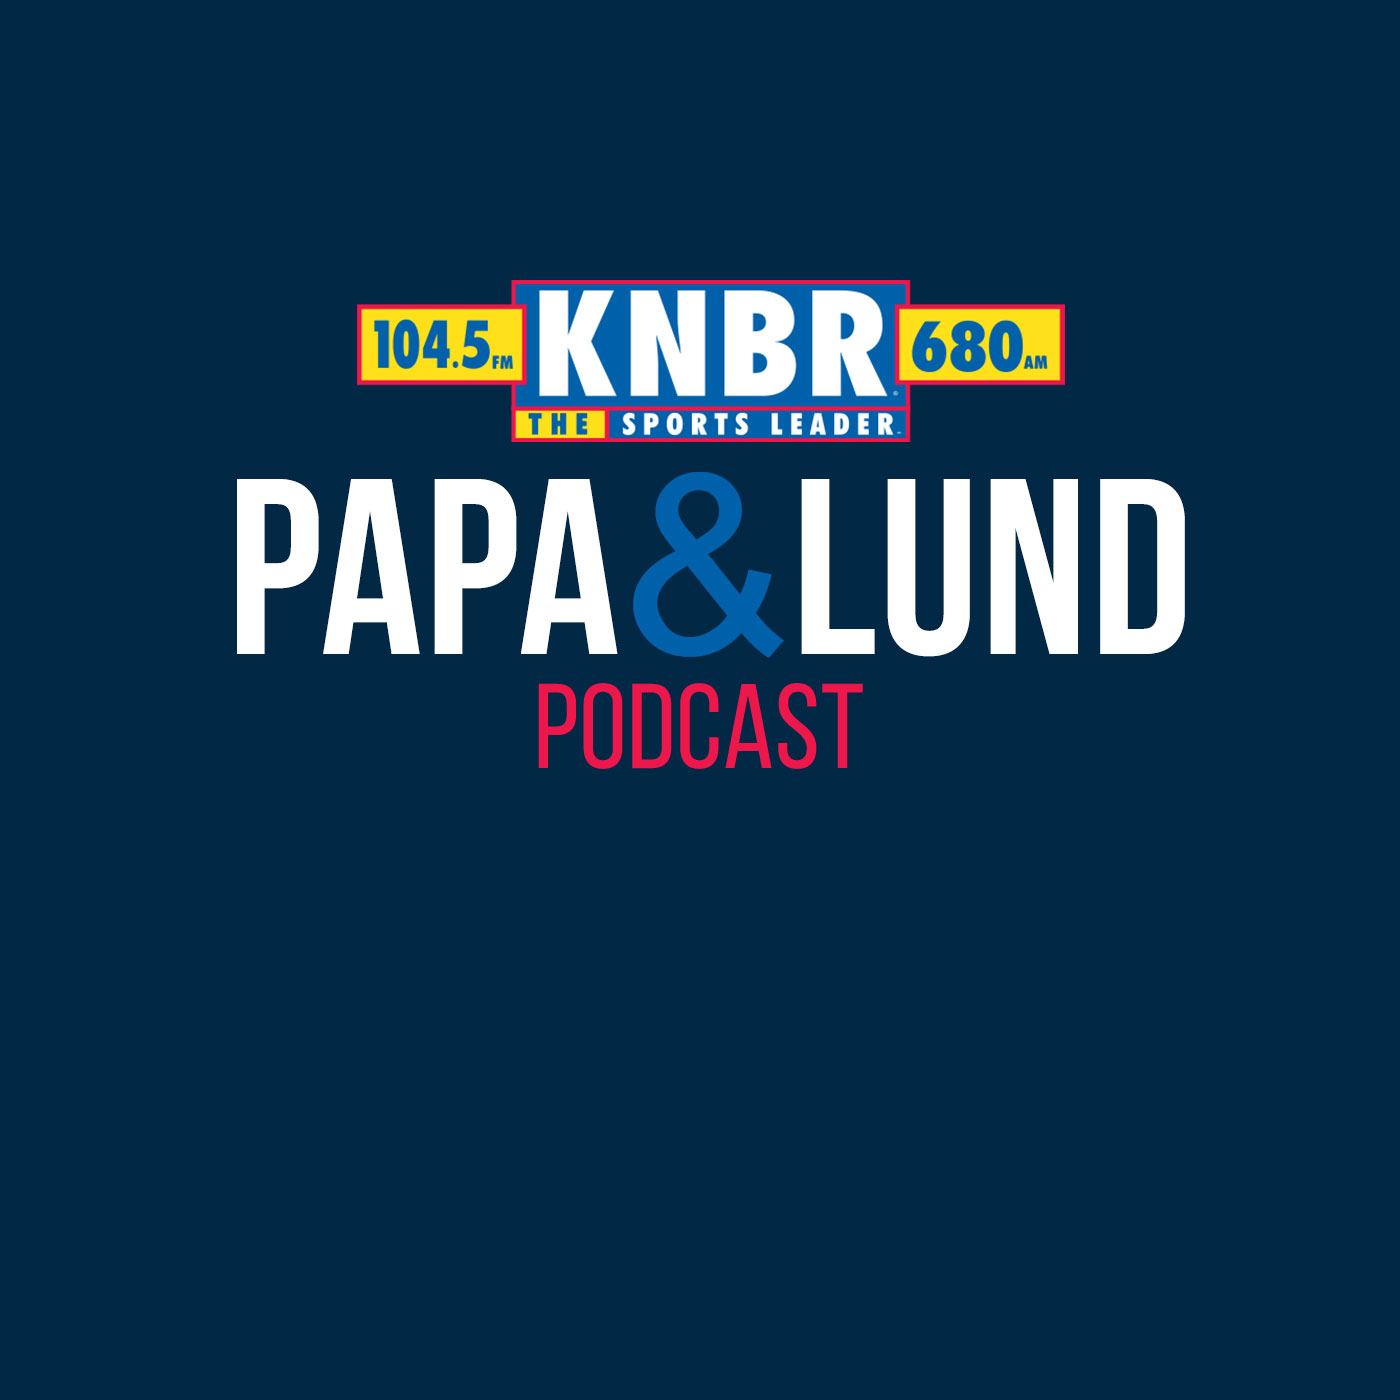 11-16 Marcus Thompson joins Papa & Lund to discuss the A's leaving to Las Vegas as well as Draymond Green receiving a 5 Game suspension for putting Rudy Gobert in a chokehold